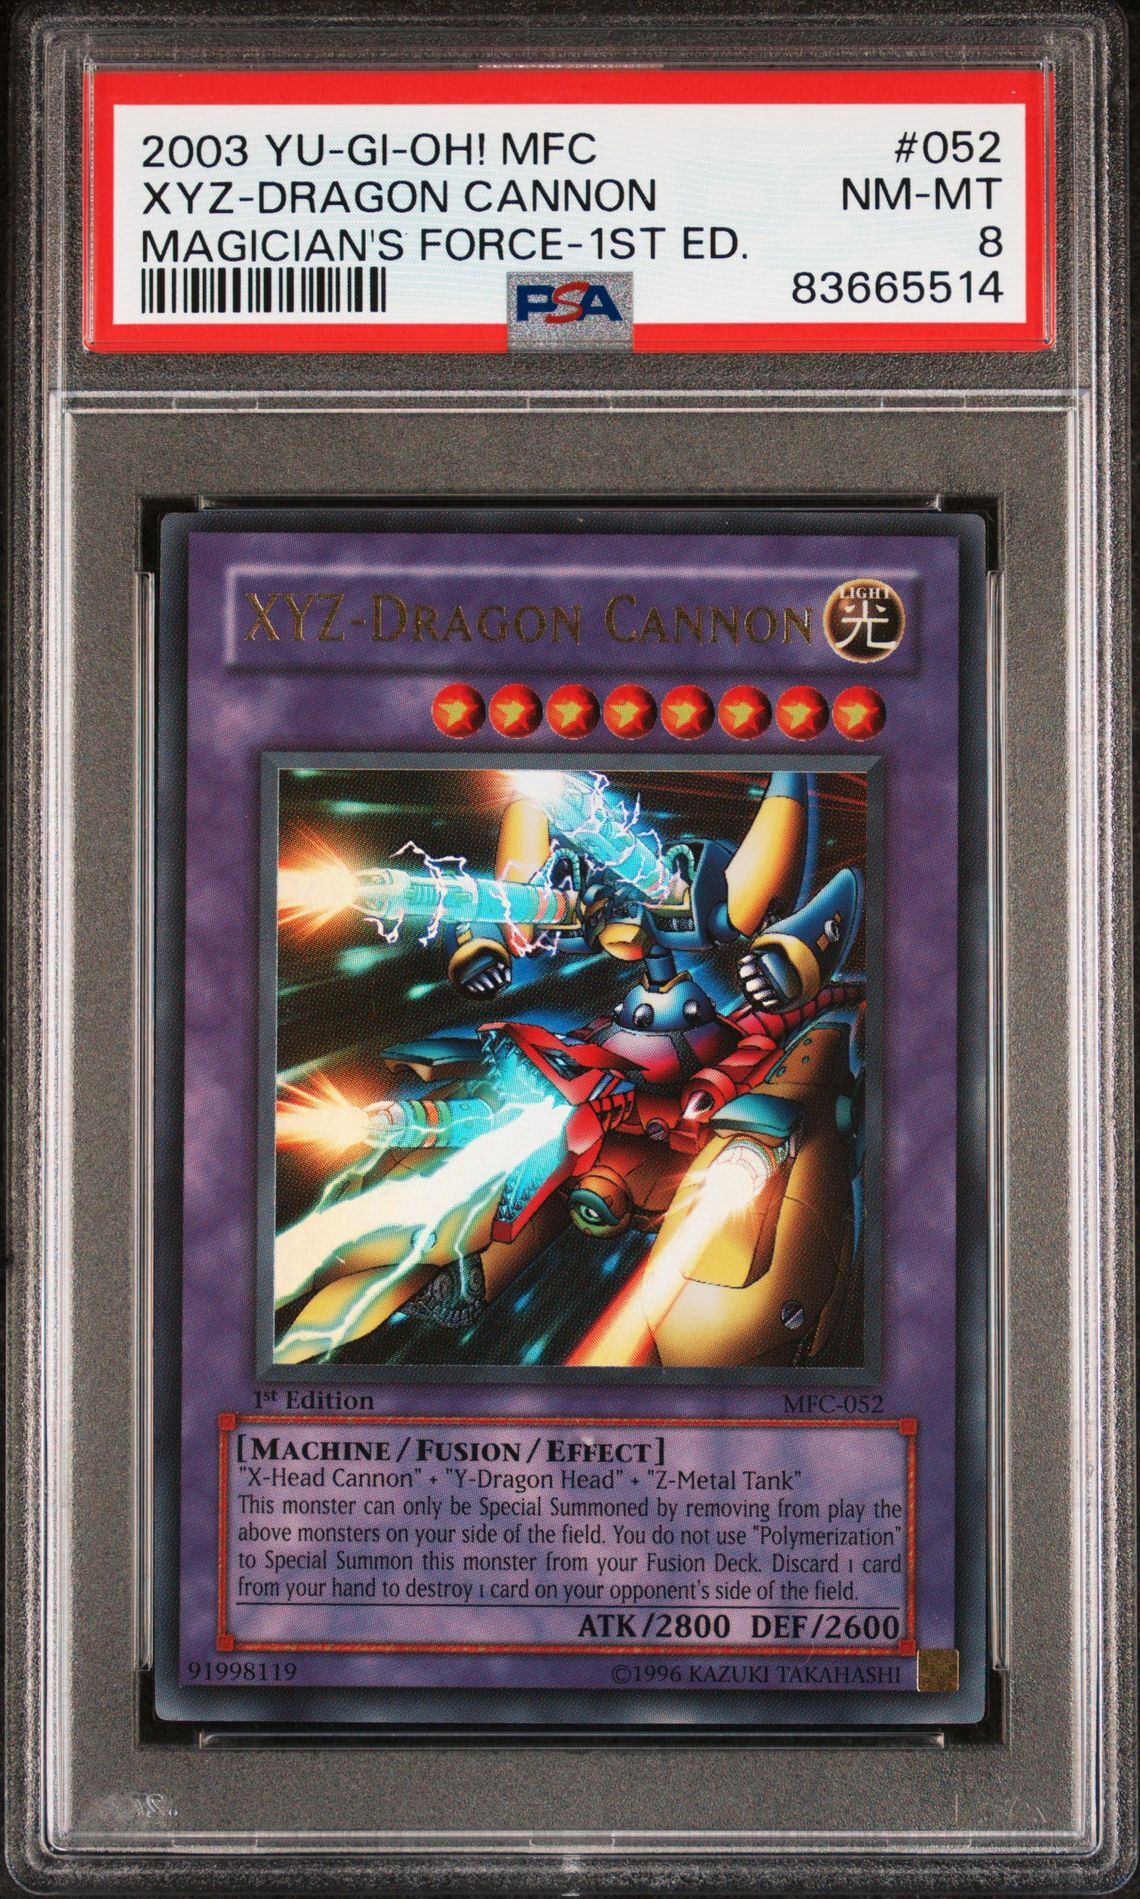 2003 YU-GI-OH! MFC-MAGICIAN'S FORCE 052 XYZ-DRAGON CANNON 1ST EDITION - PSA 8 NM-MT